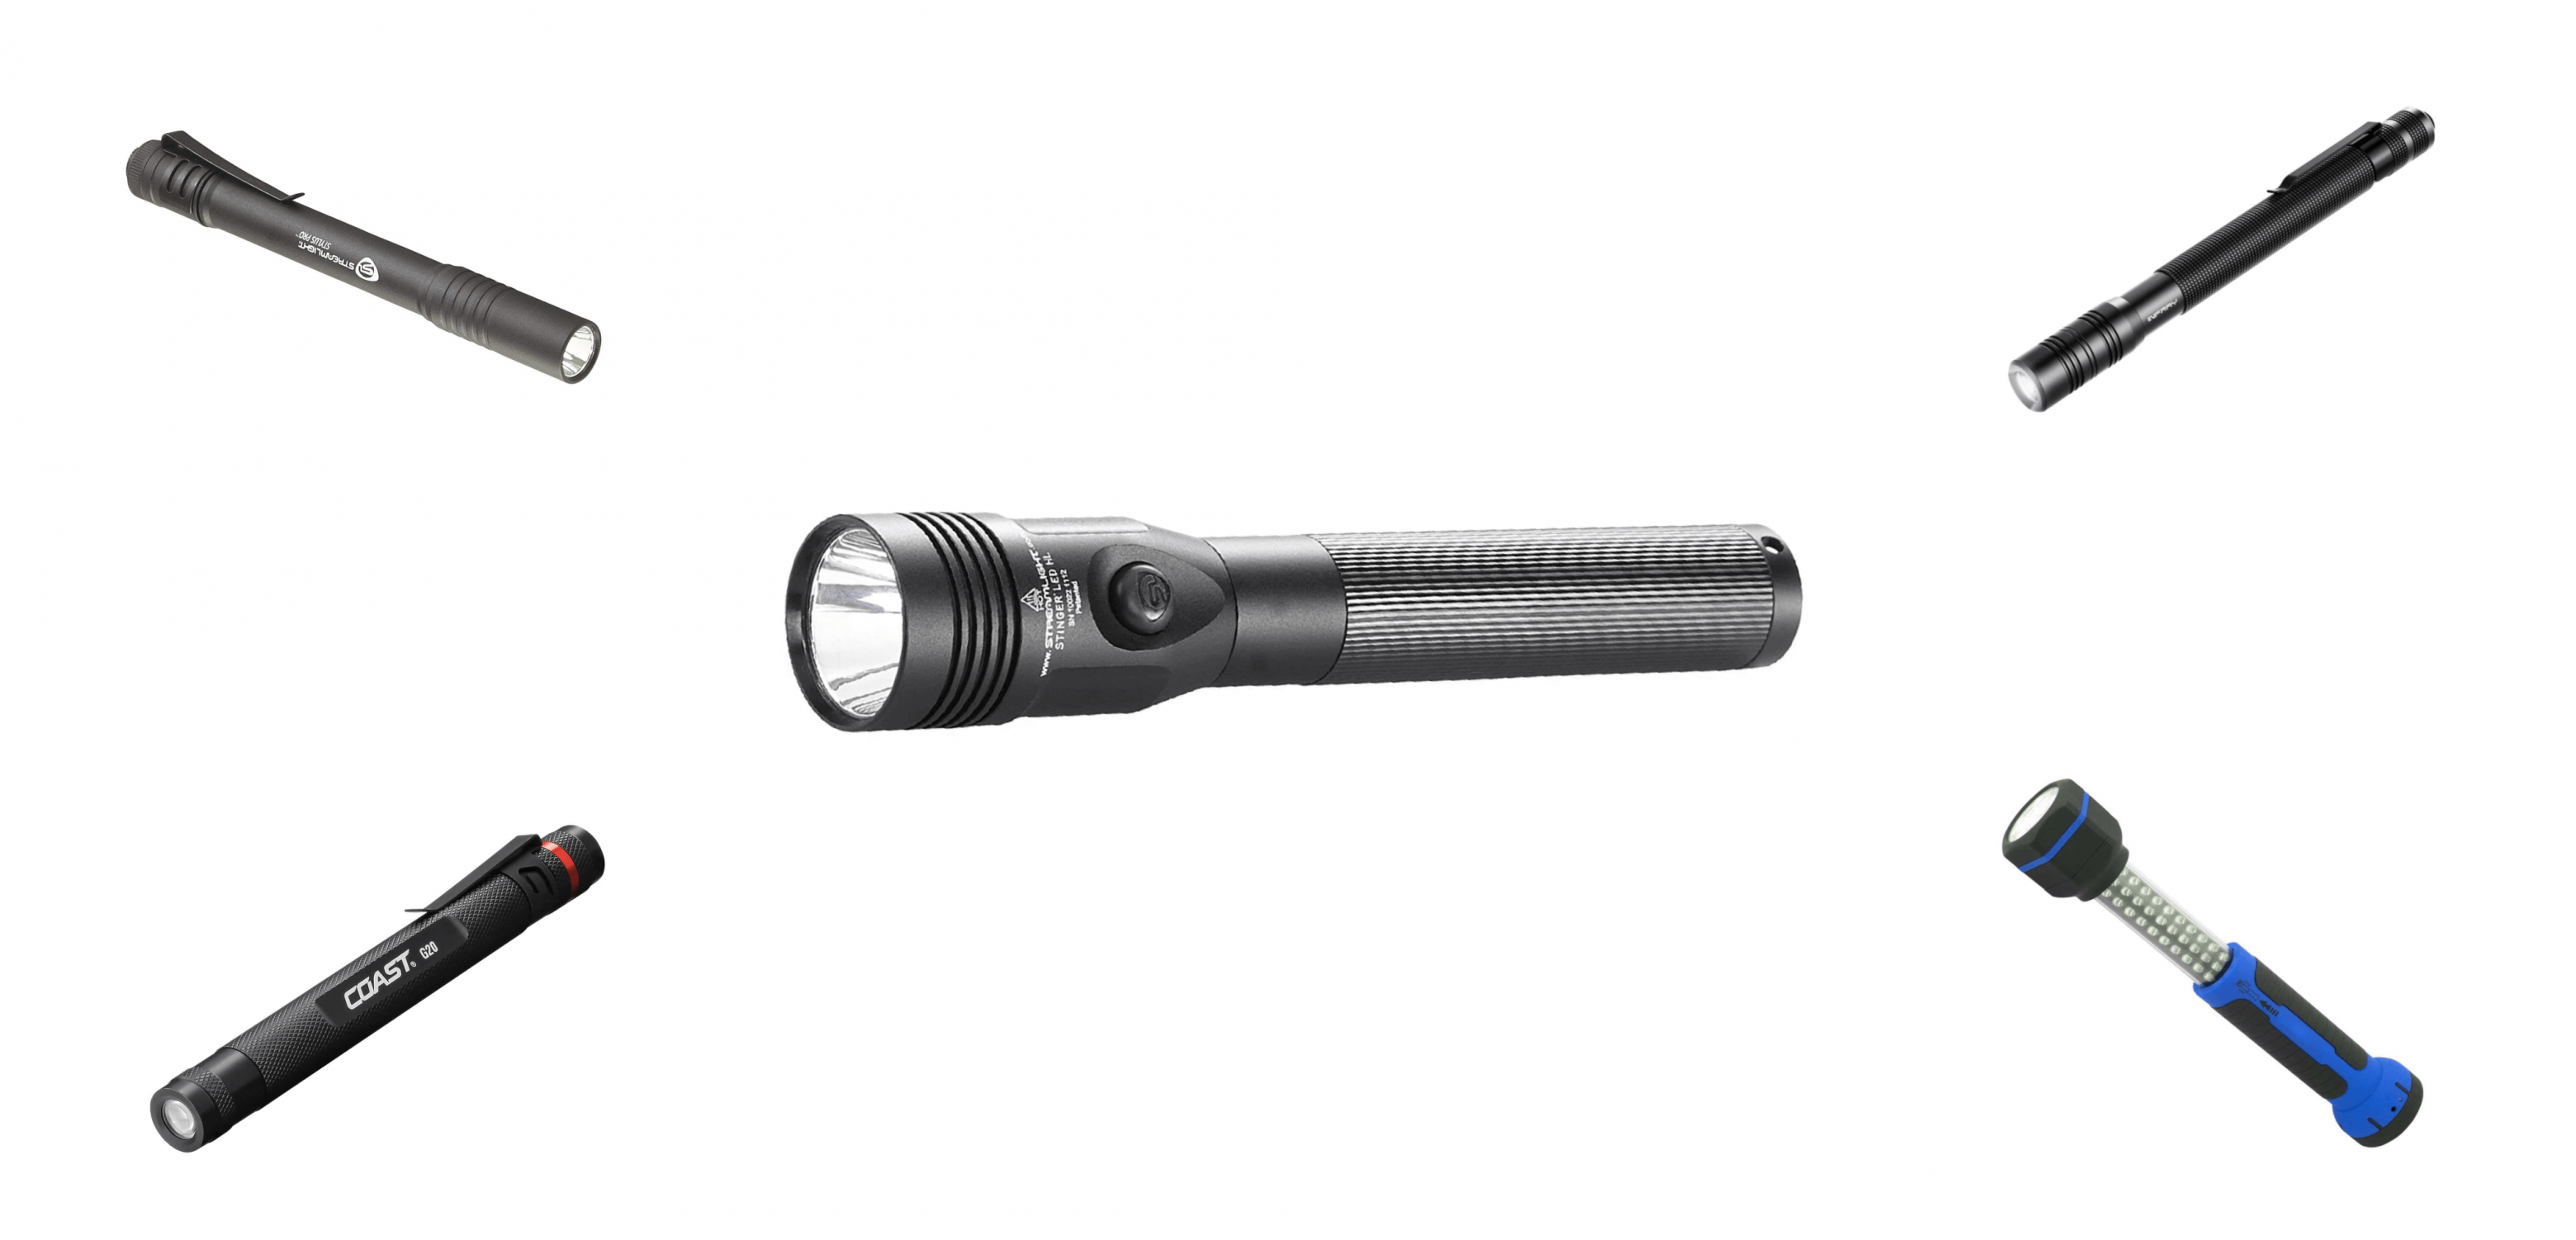 Best Flashlights For Mechanics of The Highest Quality